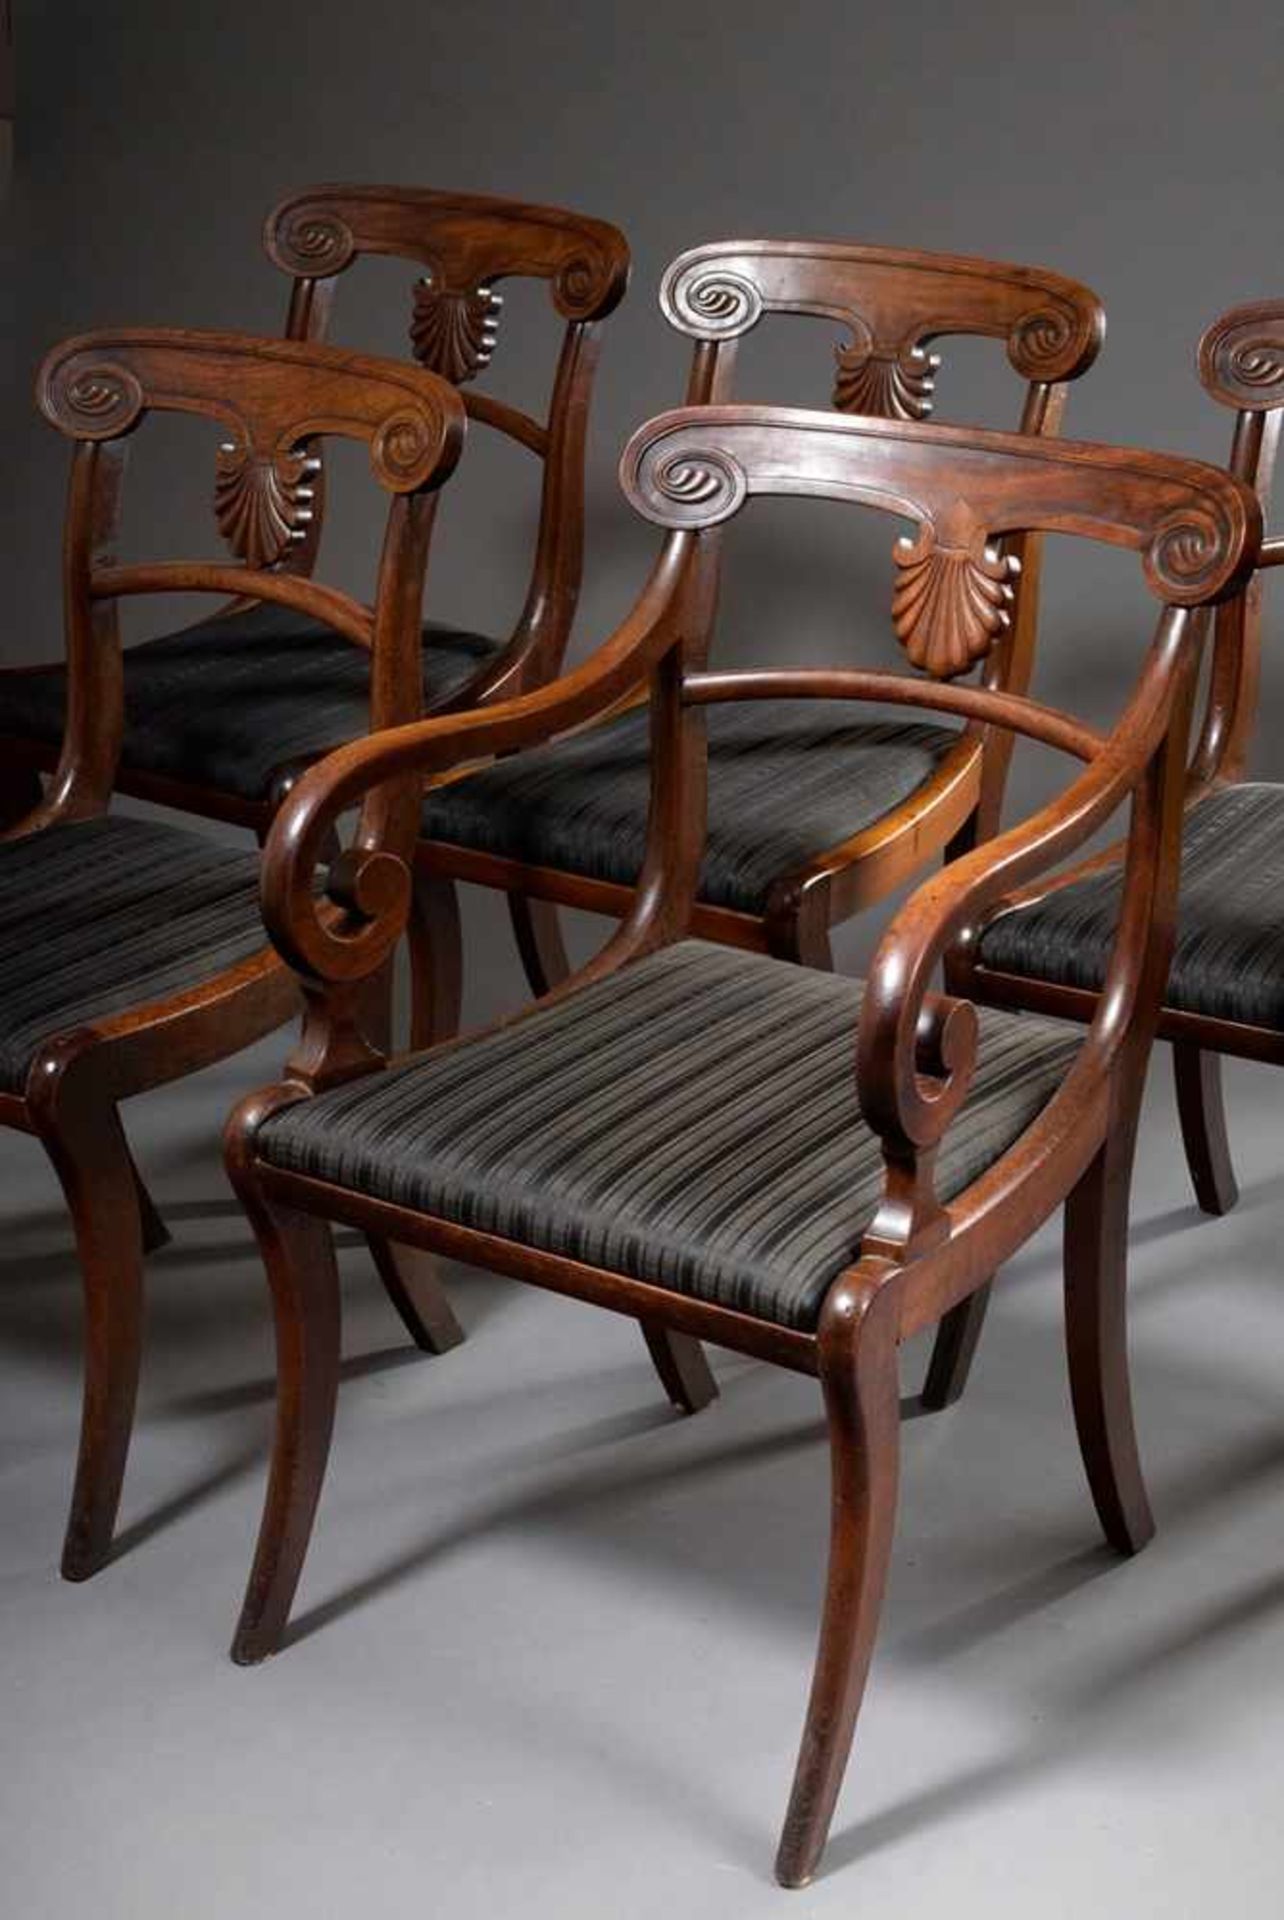 5 English Sheraton chairs with carved backrests and sabre legs, 1x with armrests, mahogany,